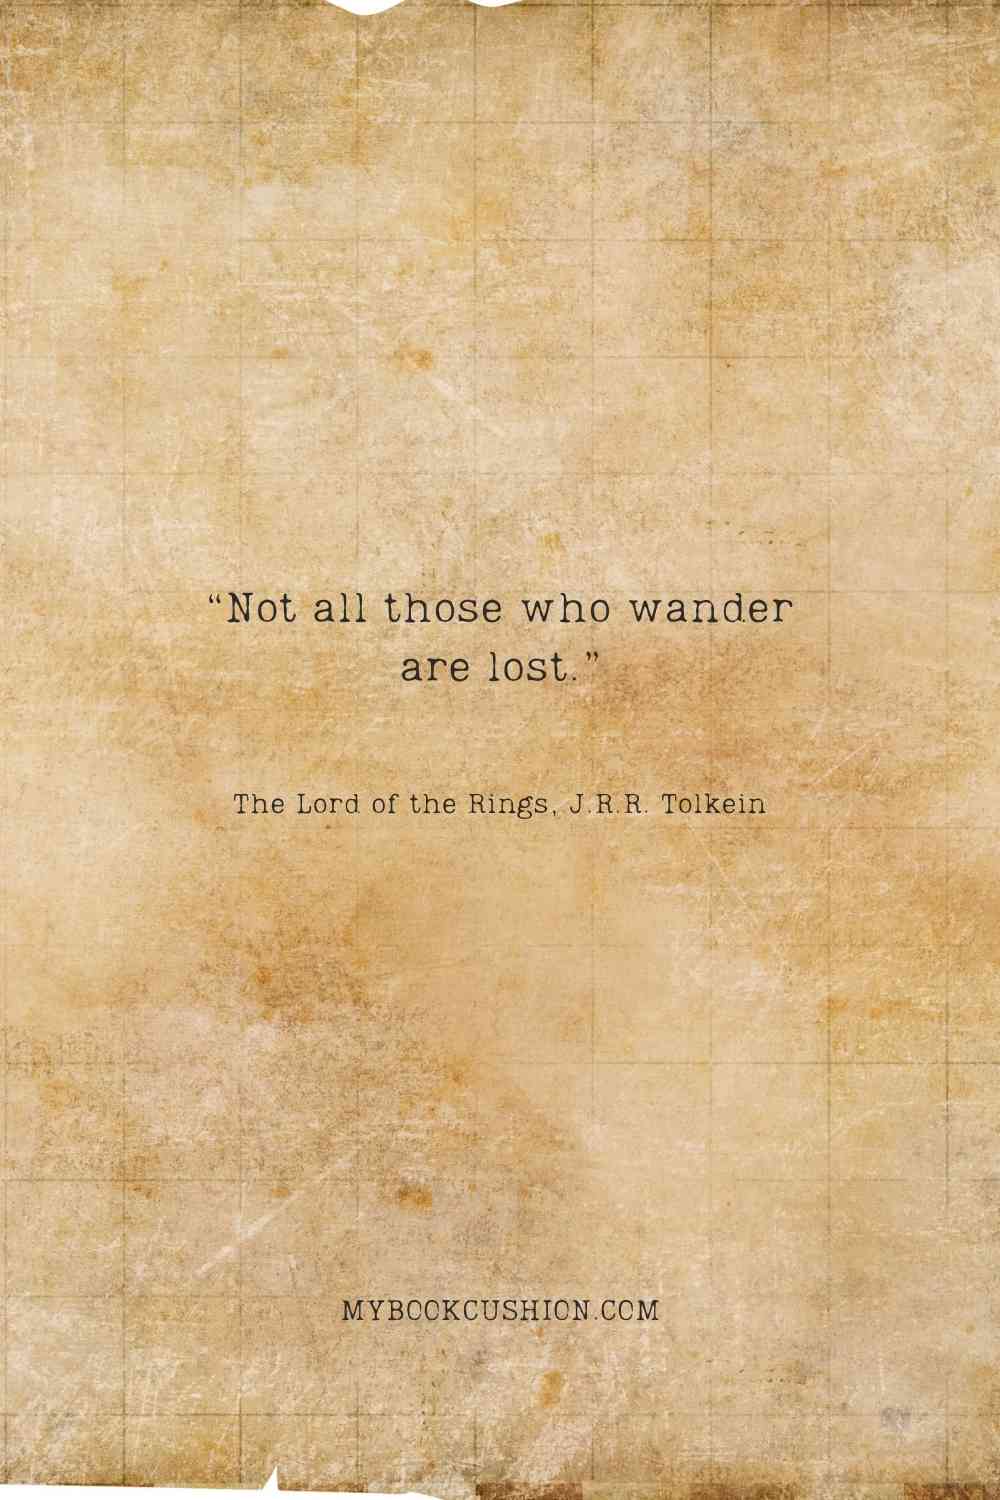 “Not all those who wander are lost.” -The Lord of the Rings, J.R.R. Tolkien